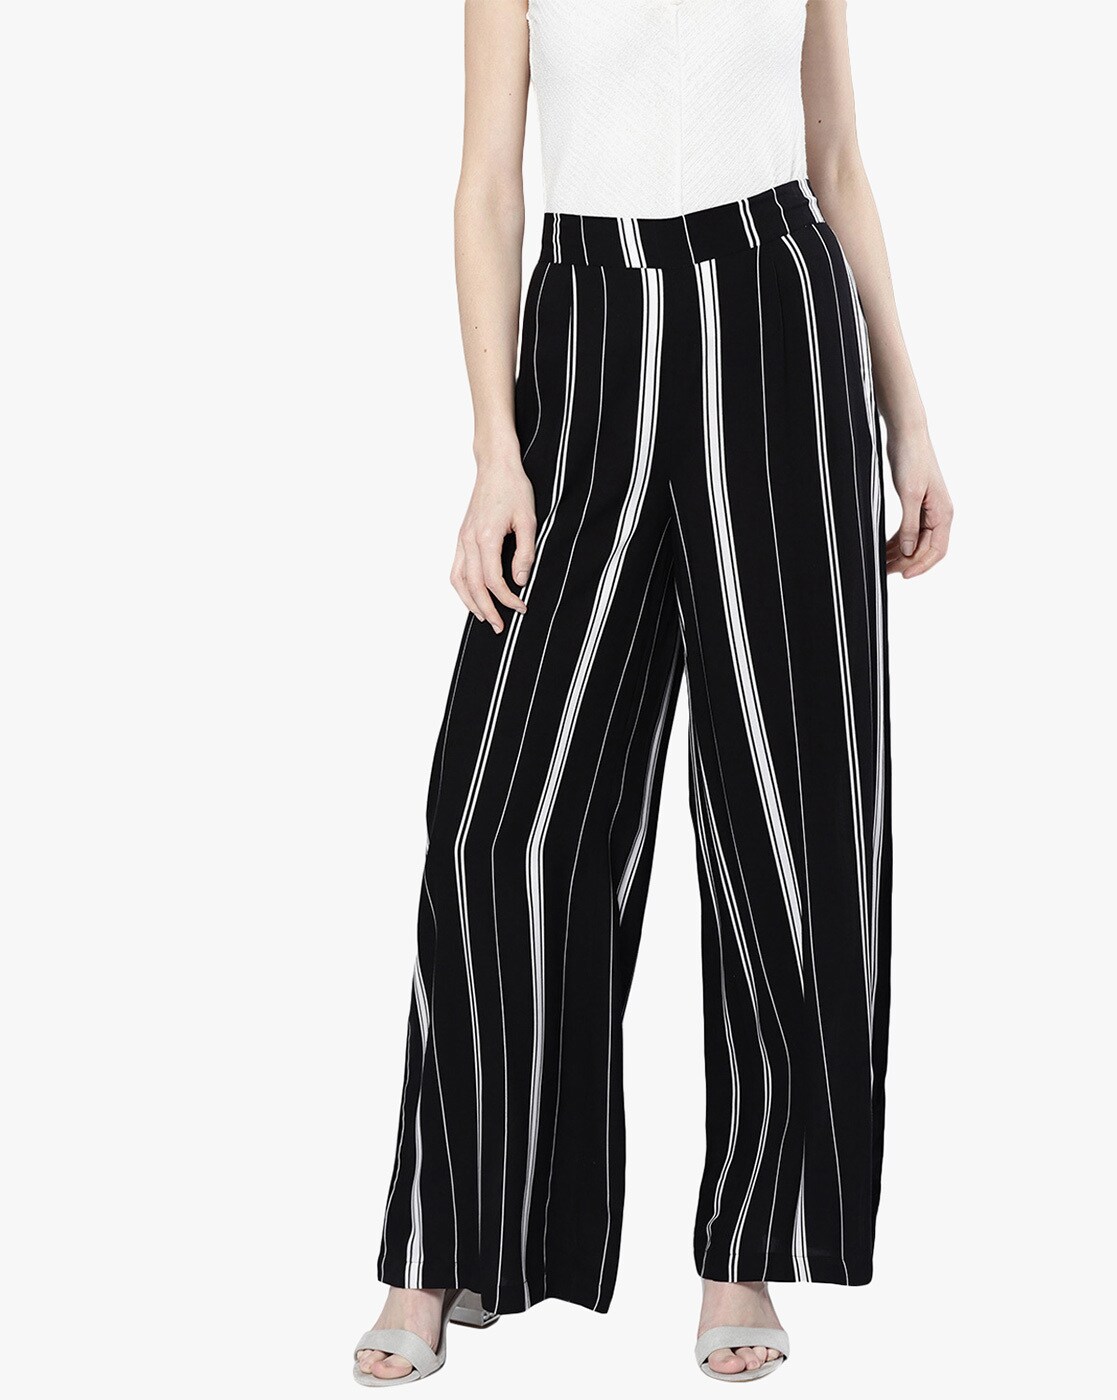 Shop Multicolor Striped Palazzo Pants for Women from latest collection at  Forever 21  385172